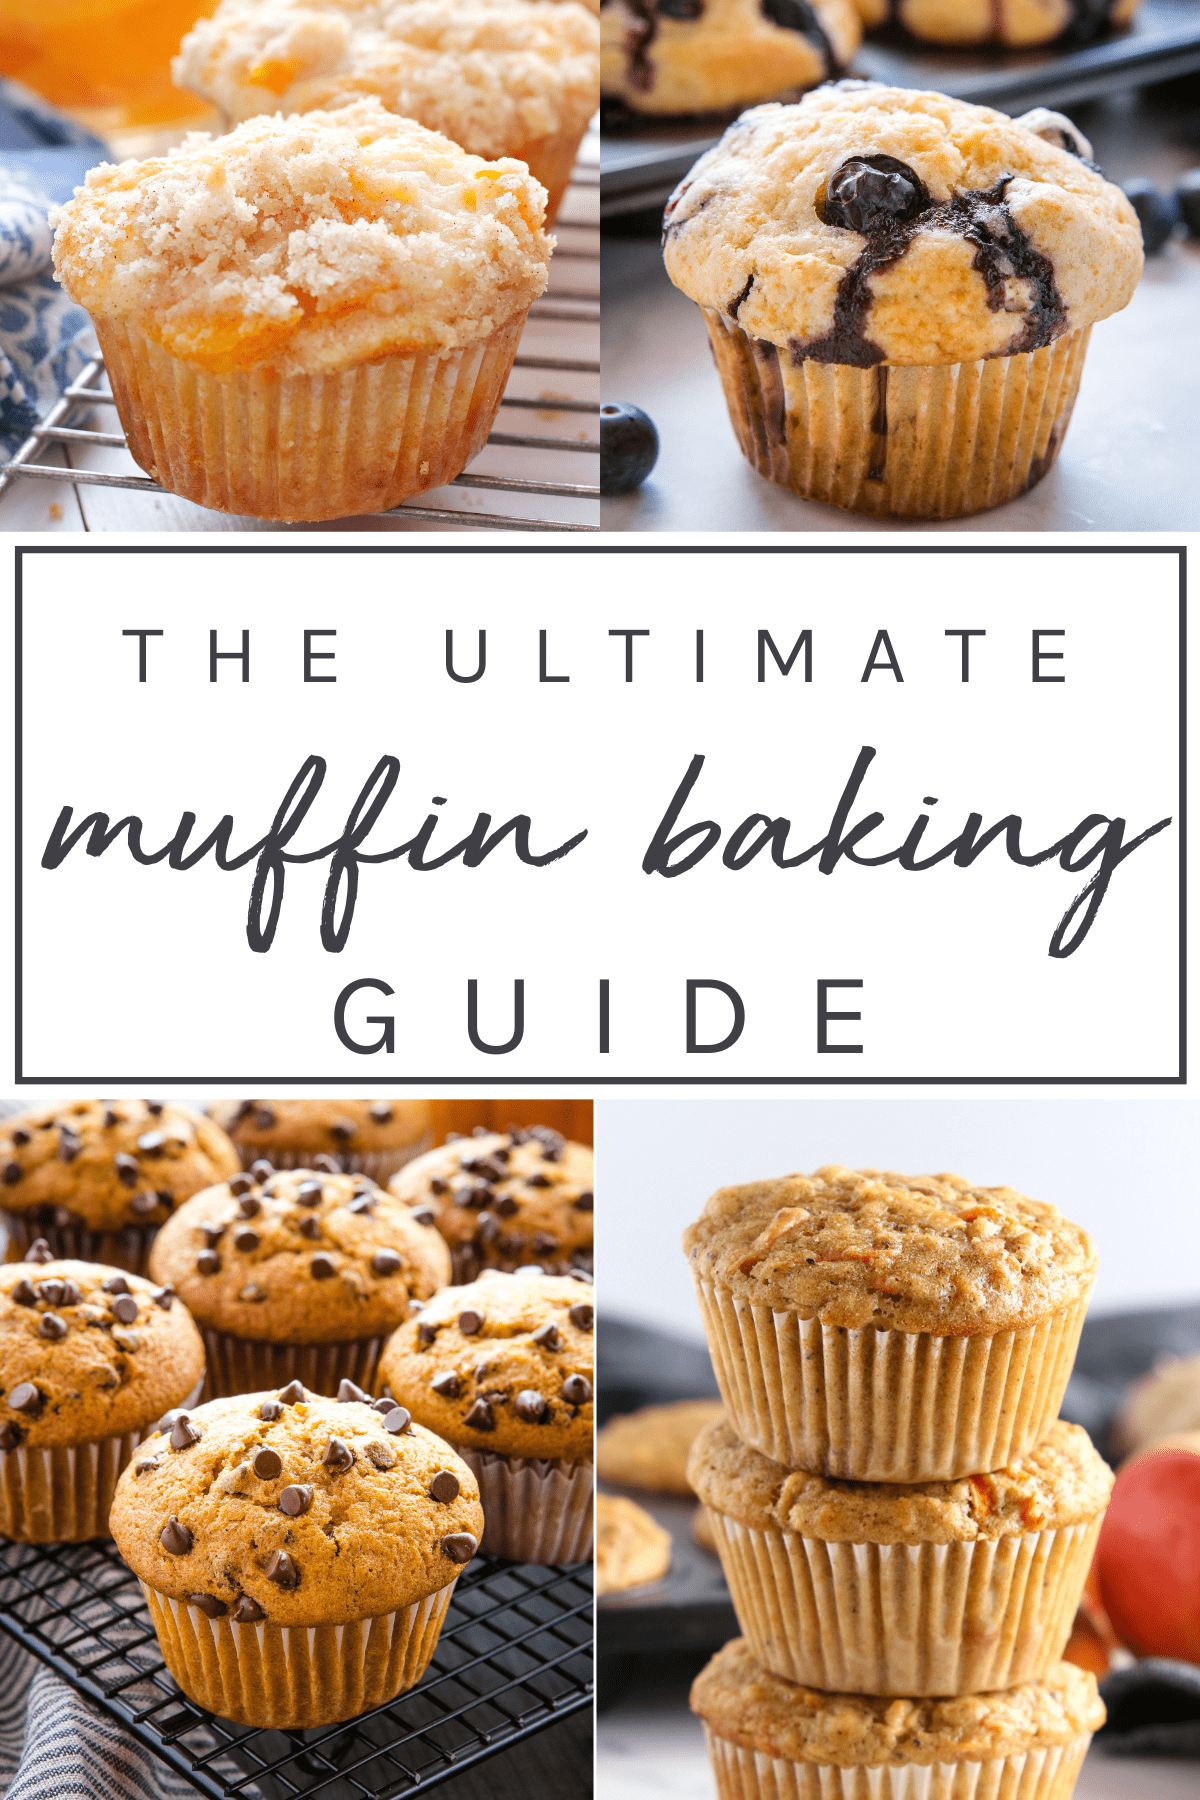 How to Make Muffins (Plus Pro Tips & Recipes) - The Busy Baker